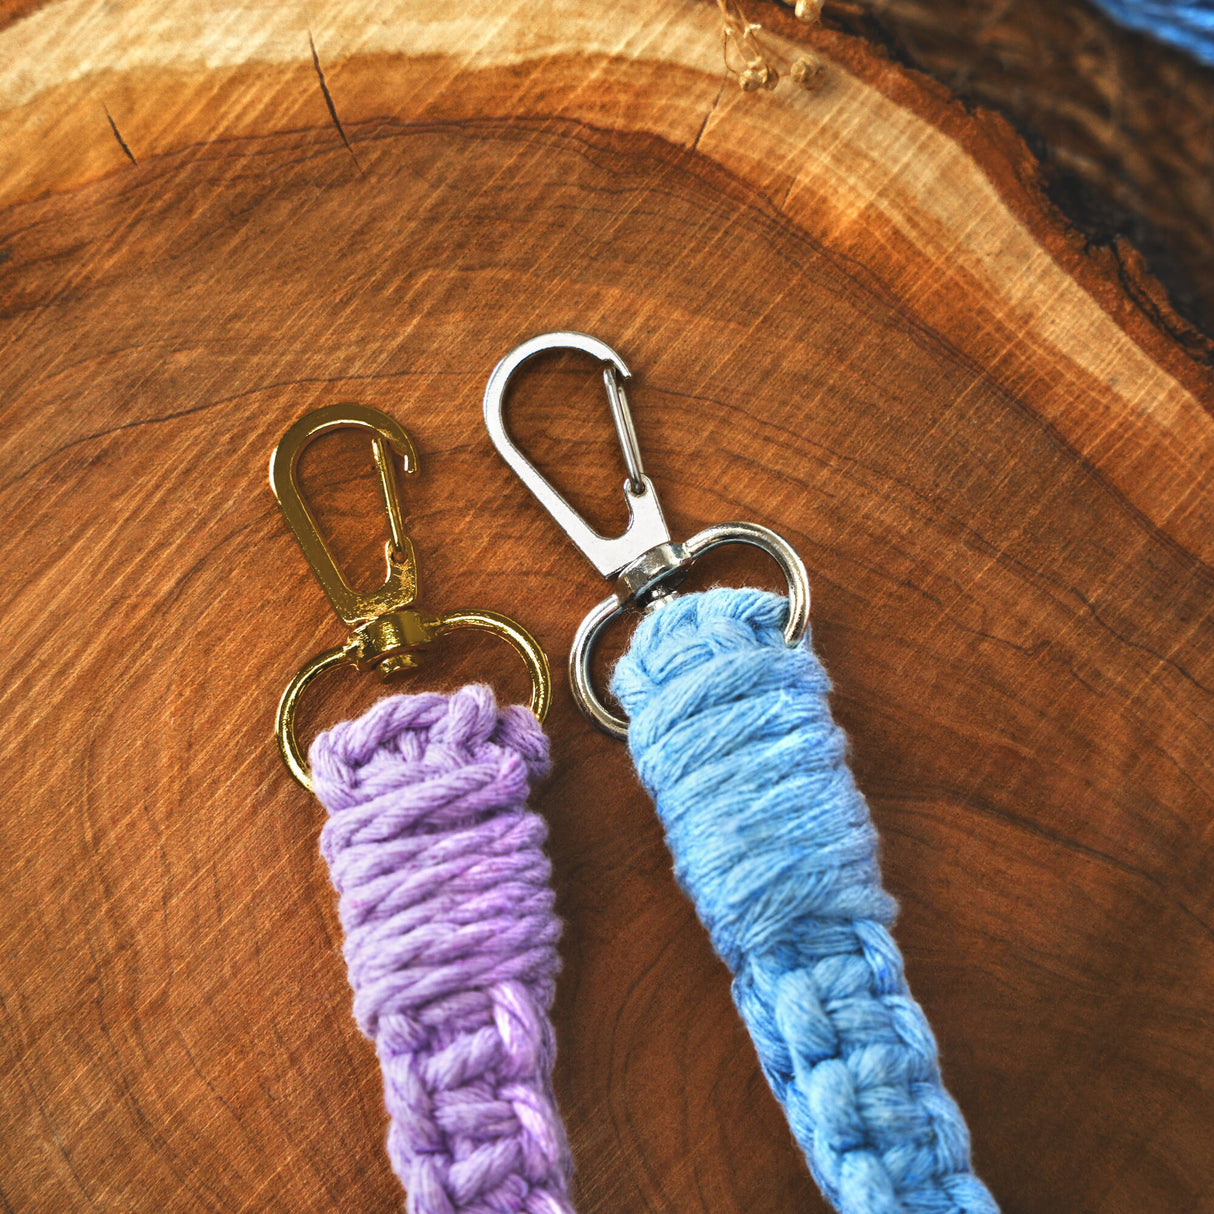 two crocheted key chains sitting on a piece of wood